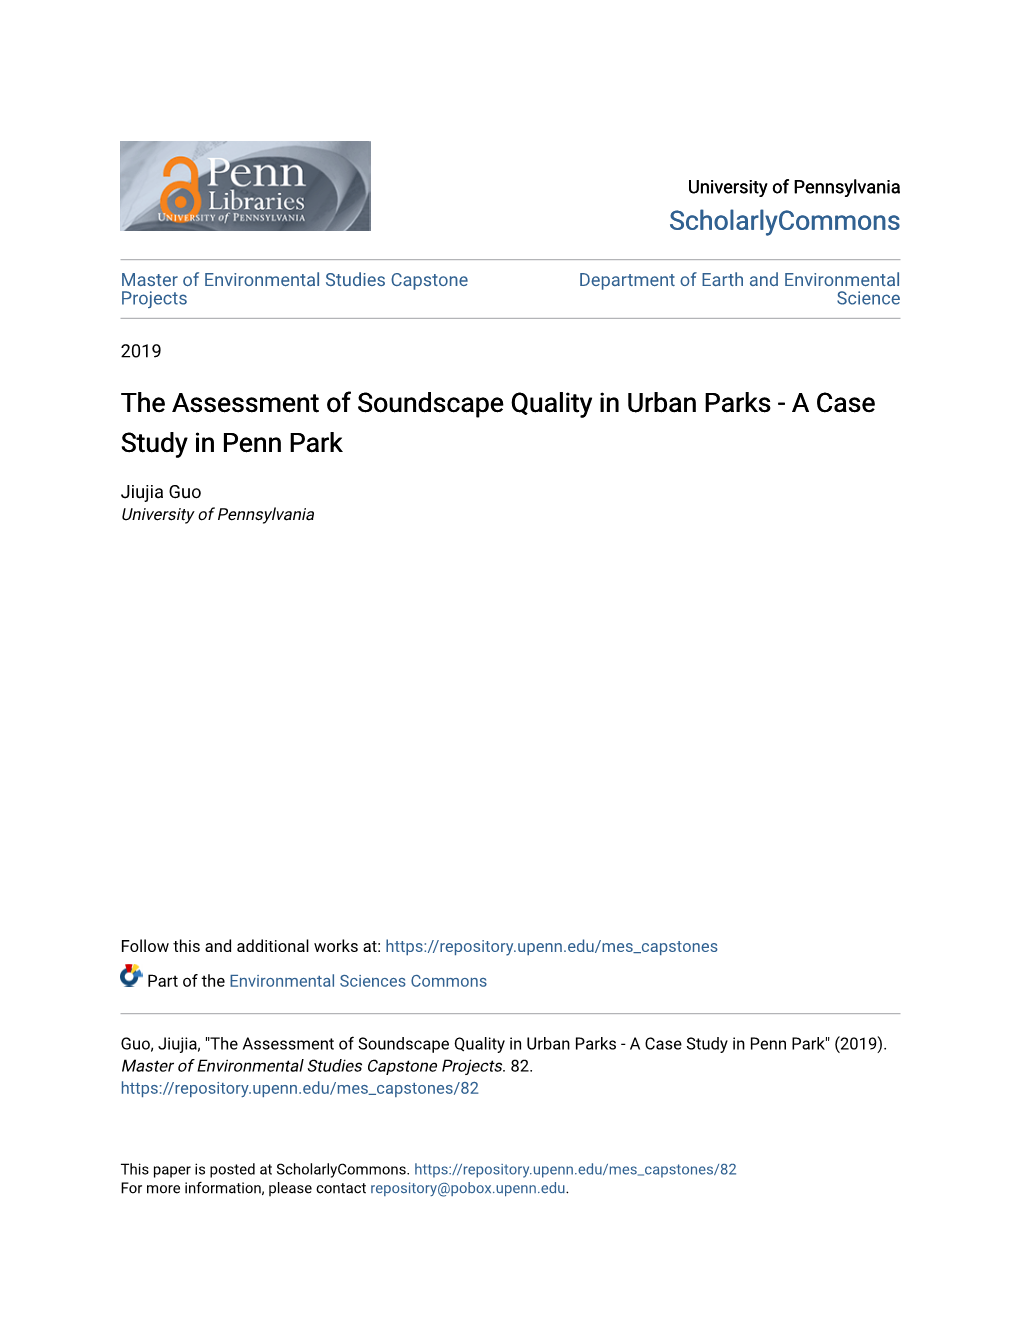 The Assessment of Soundscape Quality in Urban Parks - a Case Study in Penn Park